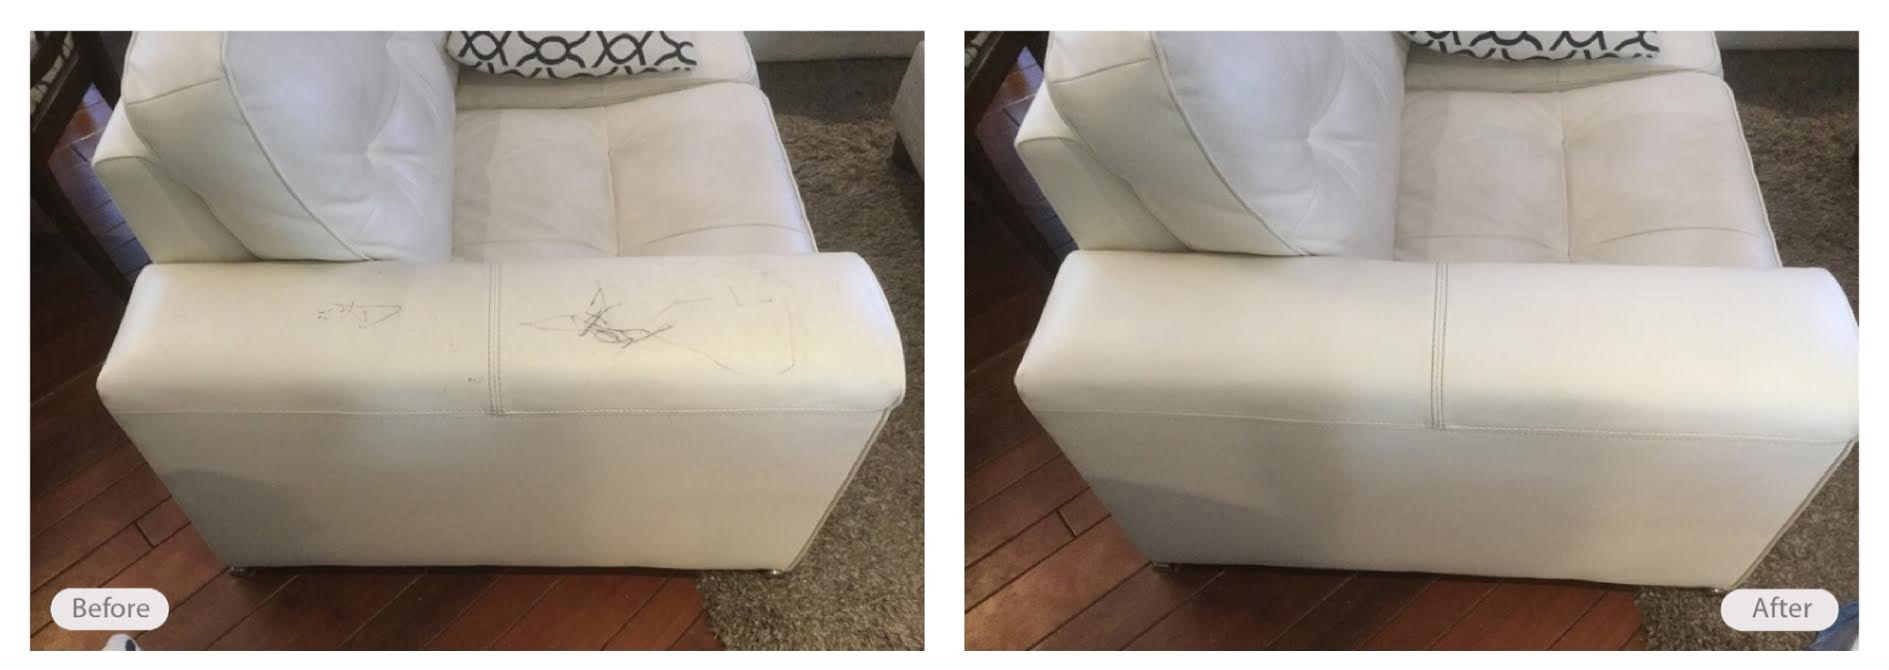 Pen marks on leather sofa removed and looking great again